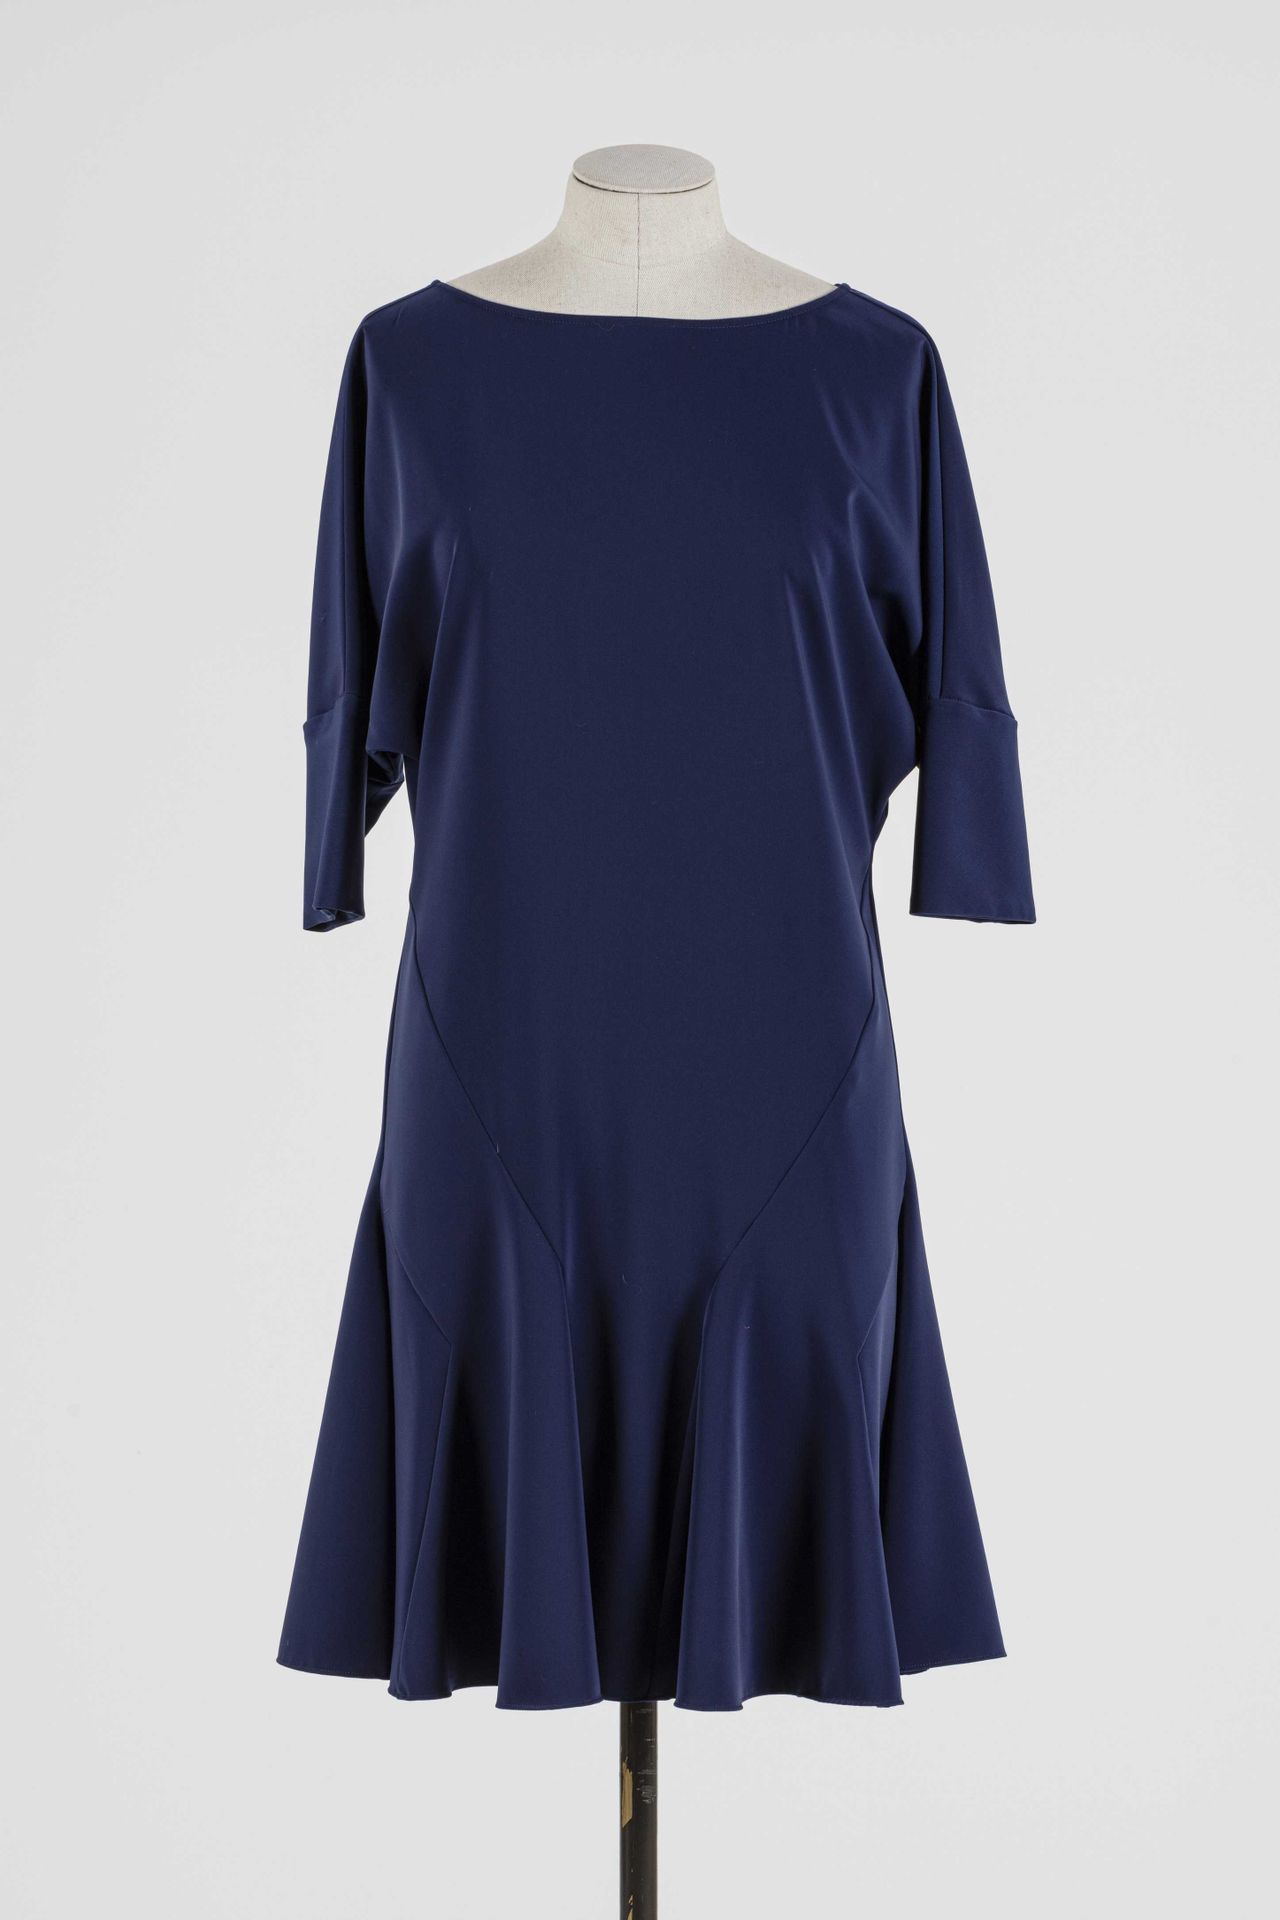 Null VERSACE : blue polyester dress, short sleeves.

T. 36